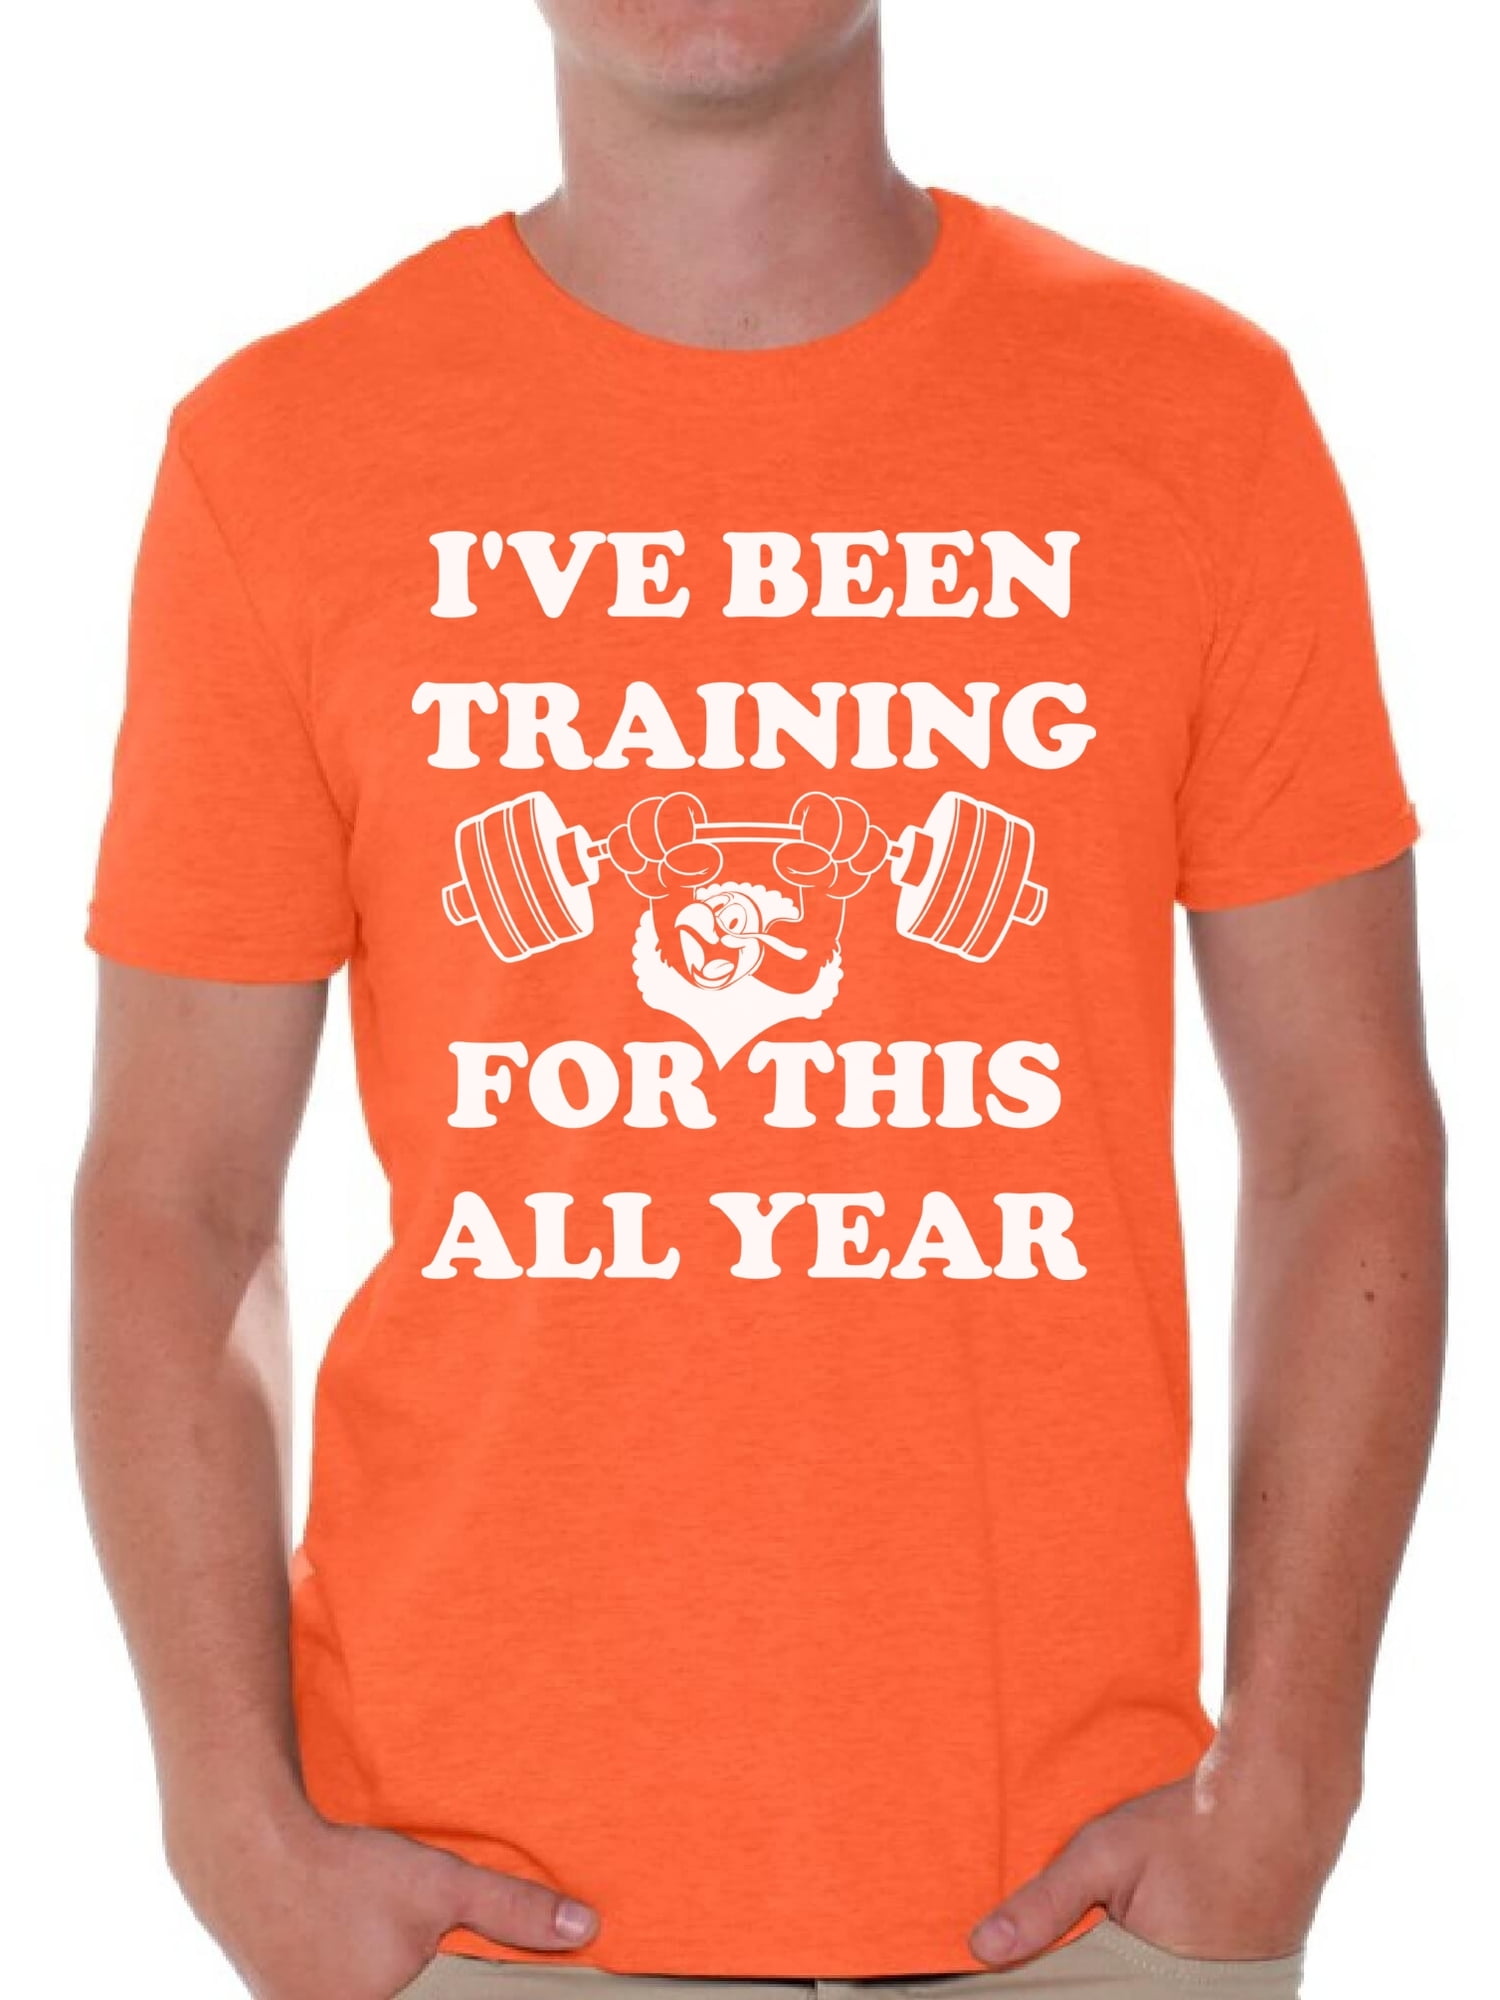 ekko firkant forklædning Awkward Styles I've Been Training for this All Year Shirt Christmas Tshirts  for Men Thanksgiving Shirts Thanksgiving Turkey Holiday Top Ugly Christmas T -Shirt Tacky Party Funny Thanksgiving Shirt - Walmart.com